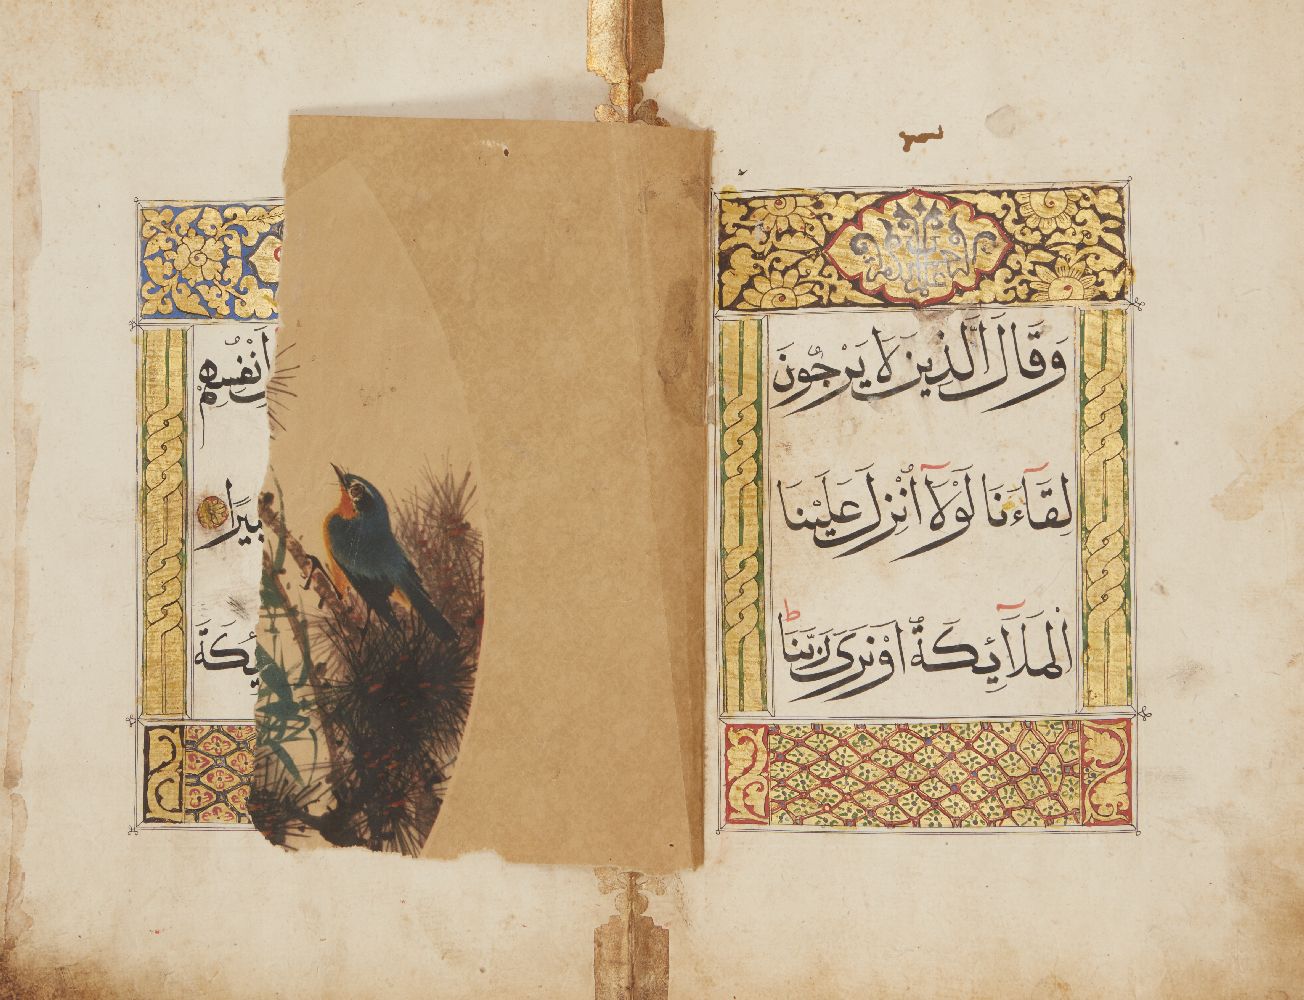 A group of 6 Juz from a Chinese qur'an, 18th century, comprising Juz 9, 17, 19, 26, 27 and 29, - Image 7 of 7